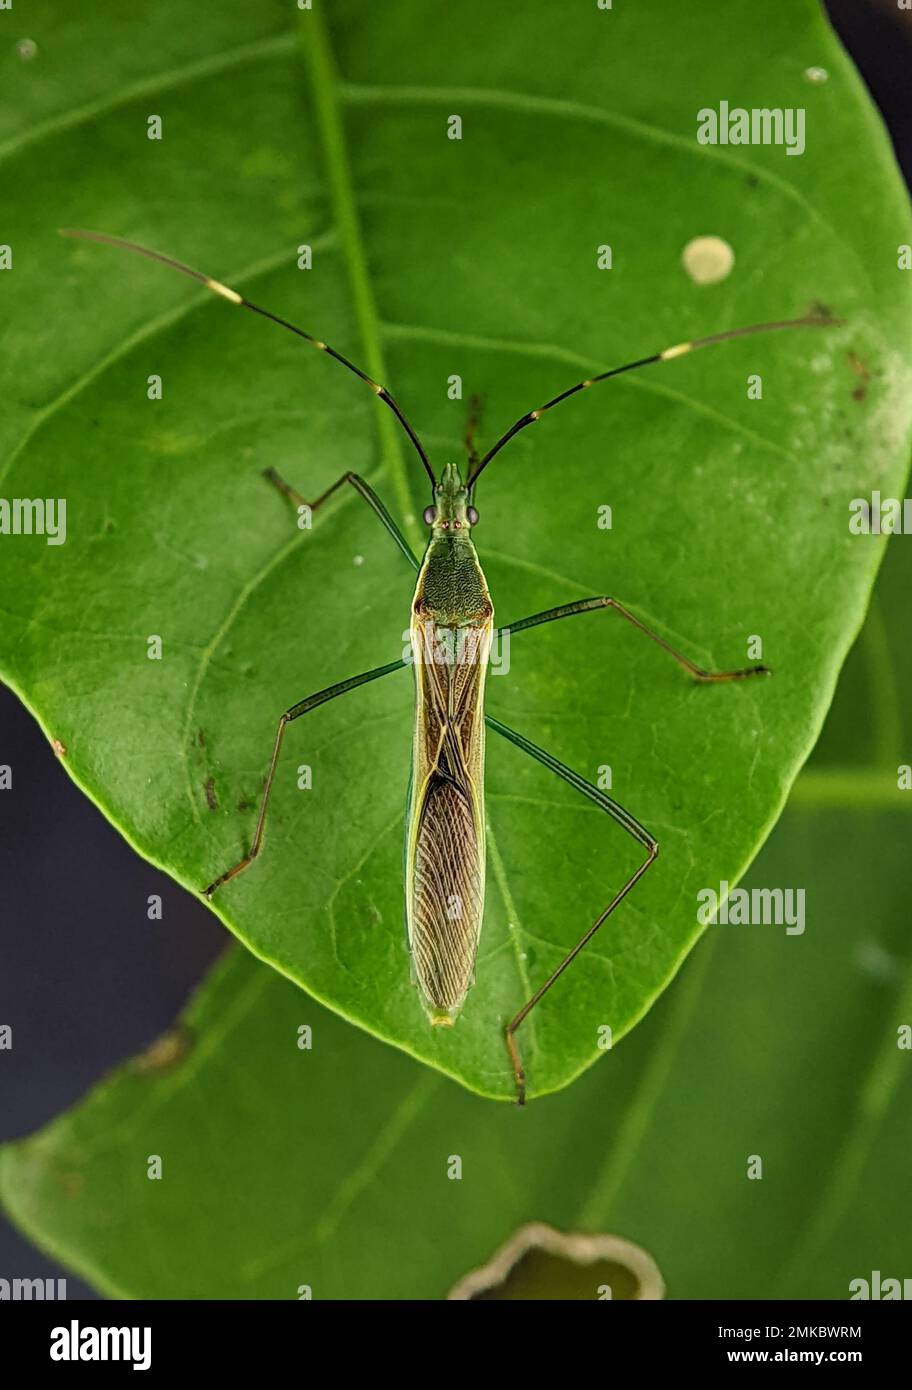 Leptocorisa oratoria, the rice ear bug, is an insect from the family Alydidae, the broad-headed bugs. Stock Photo